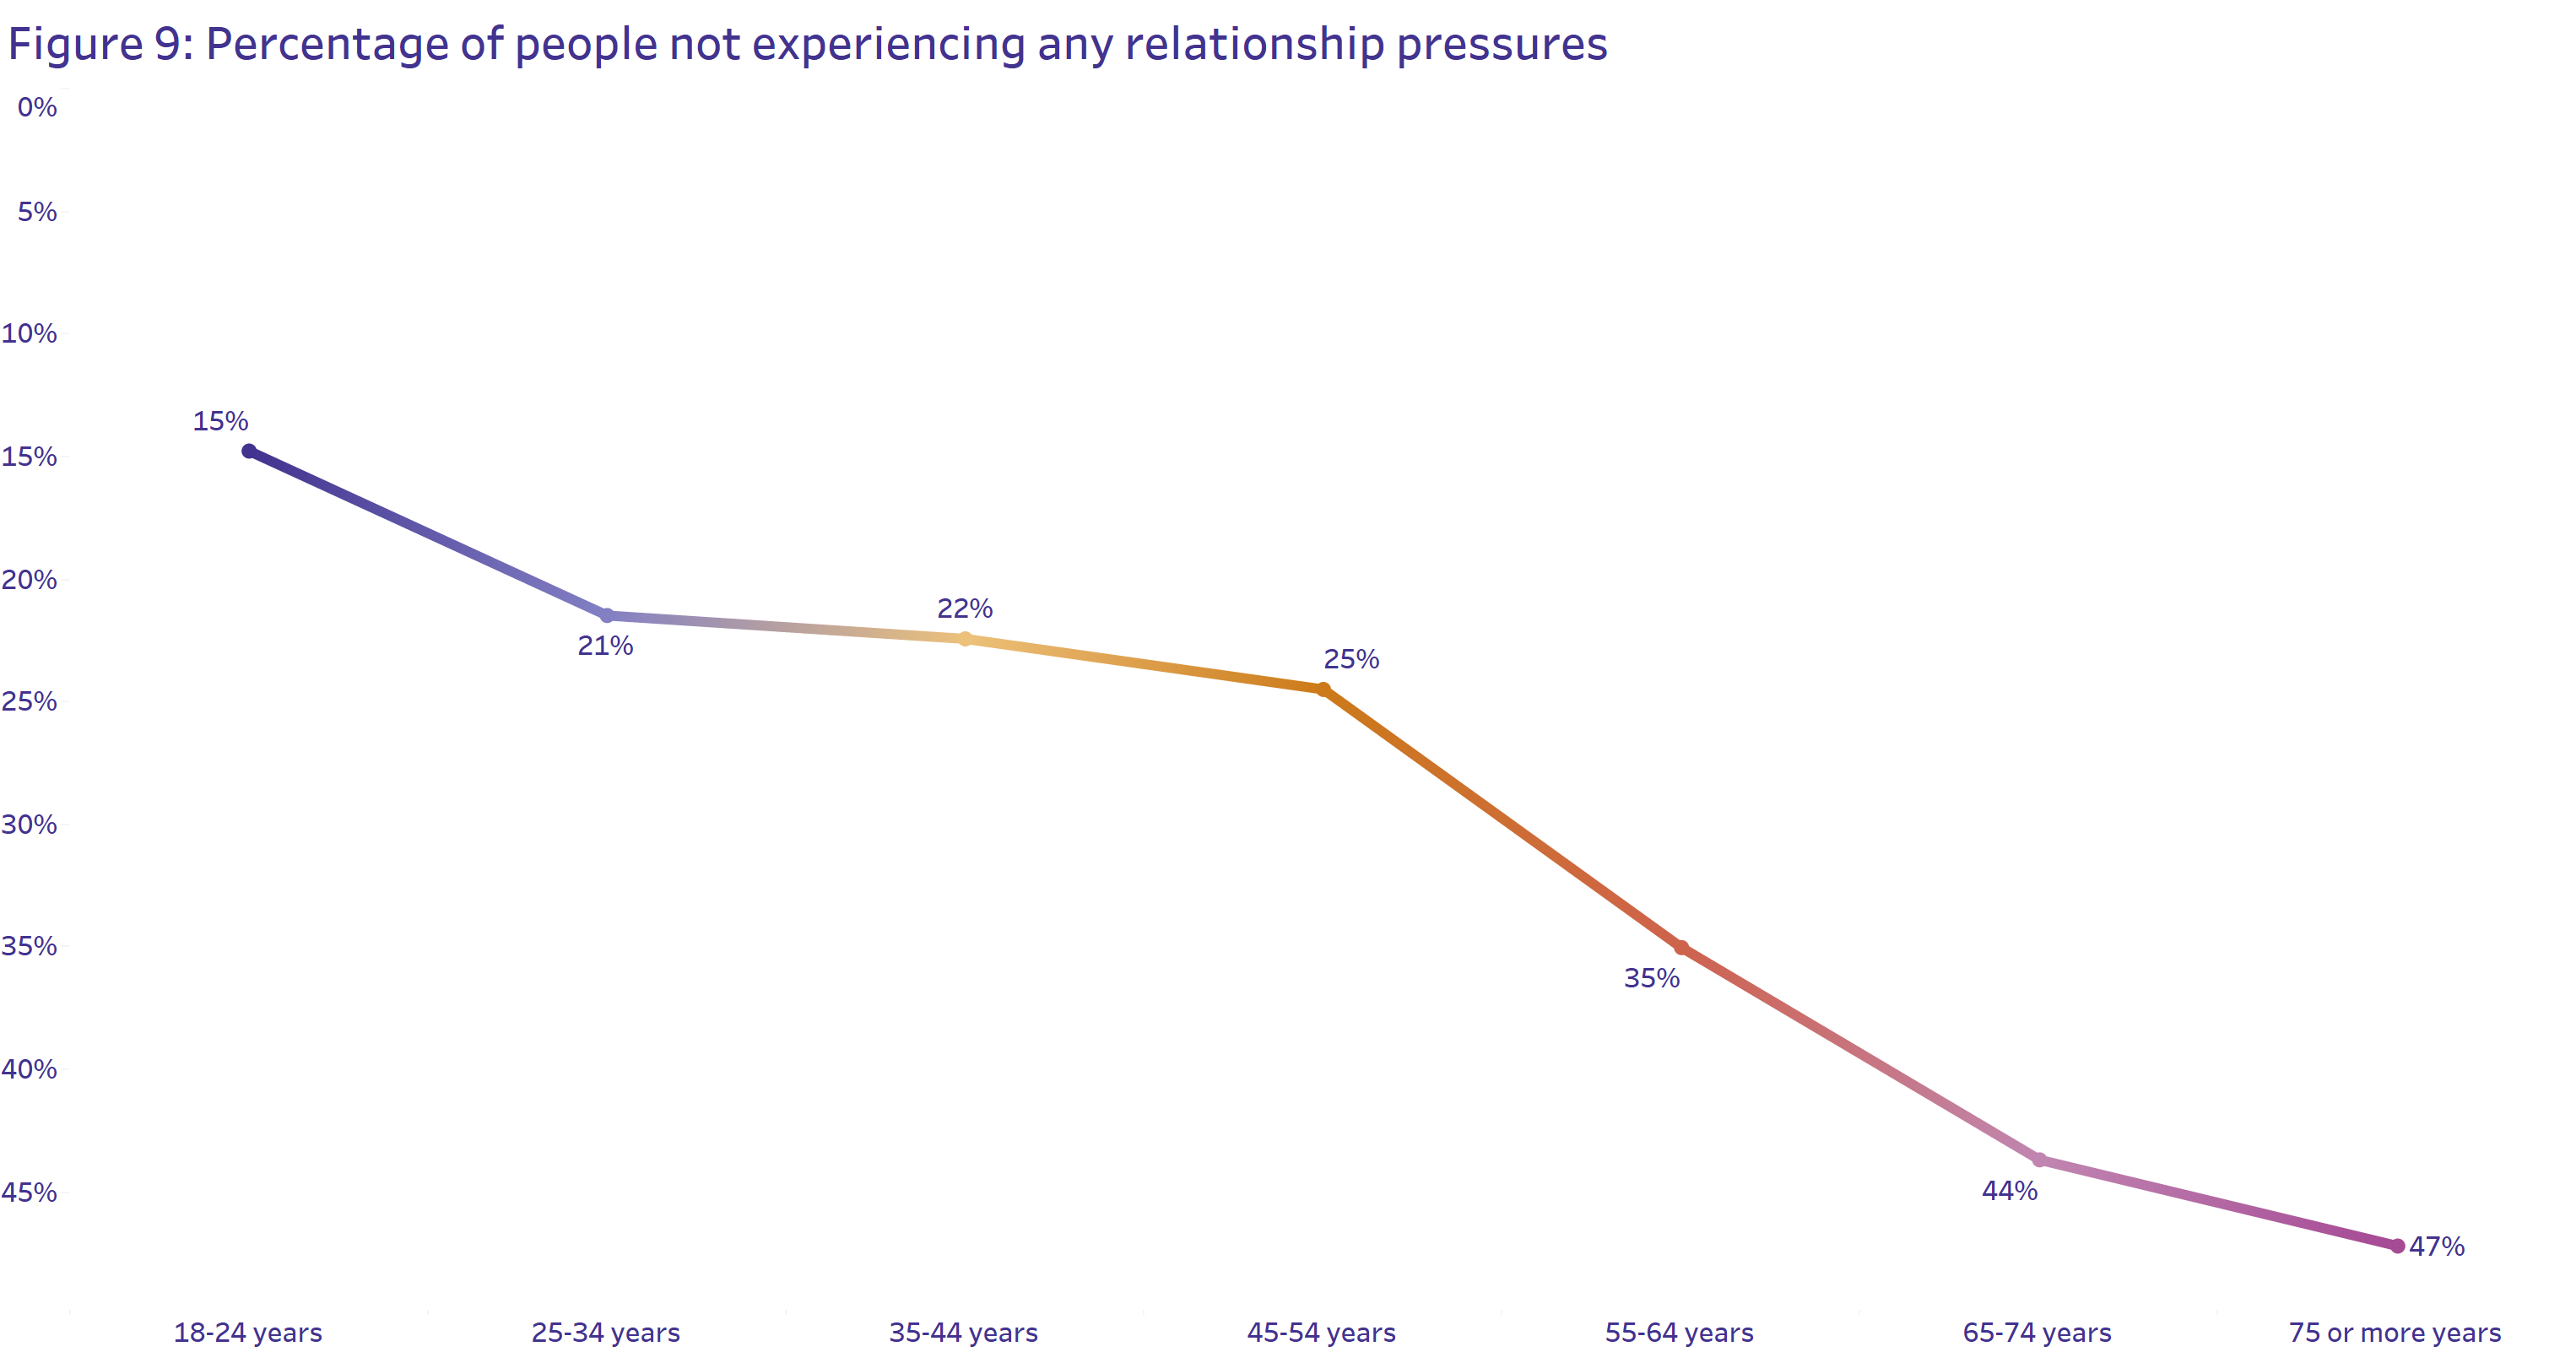 Graphic of people’s relationship satisfaction or dissatisfaction. Those who agreed with the positive words about their relationship had higher subjective wellbeing, while those who disagreed had lower subjective wellbeing. 